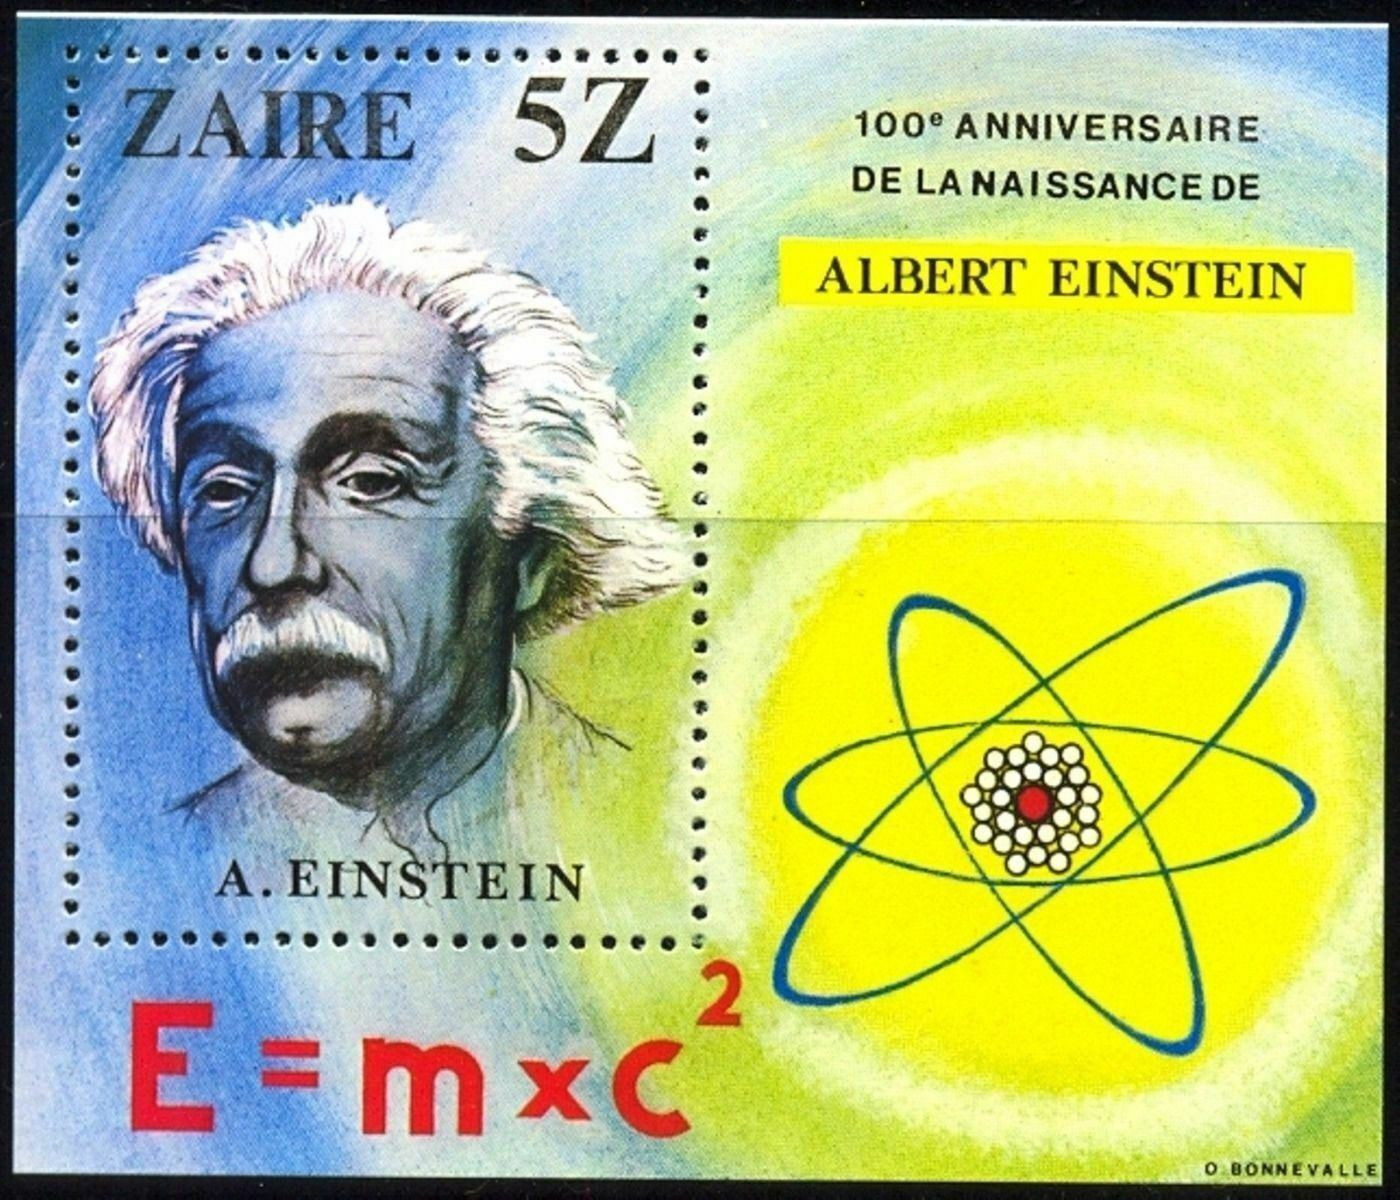 Zaire 1980 Albert Einstein Nobel Prize Atomic Energy Atoms Physics Science Stamps M/S MNH